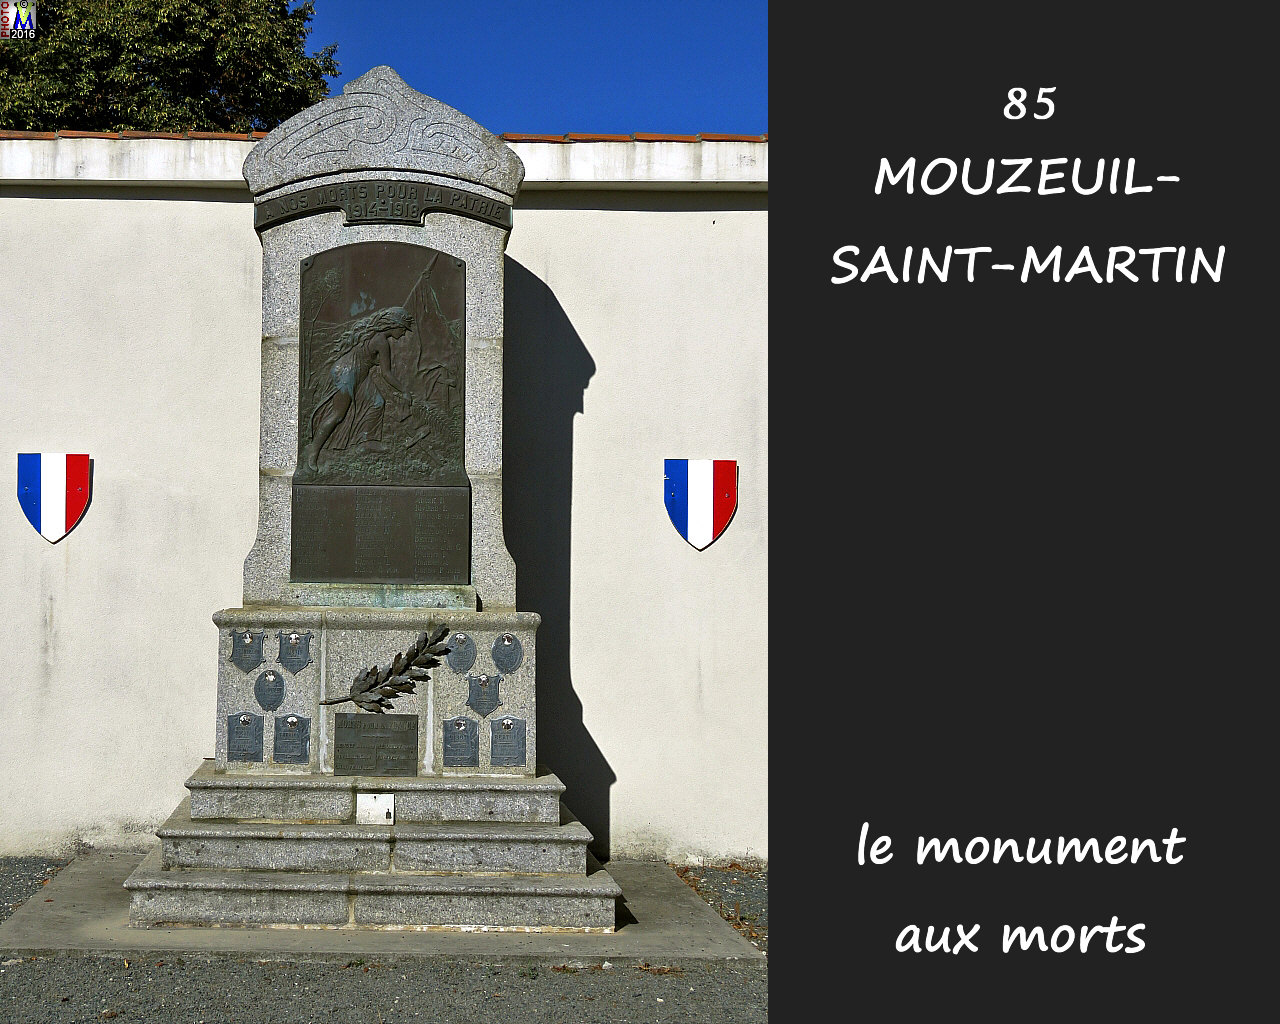 85MOUZEUIL-StMARTIN_morts_1000.jpg